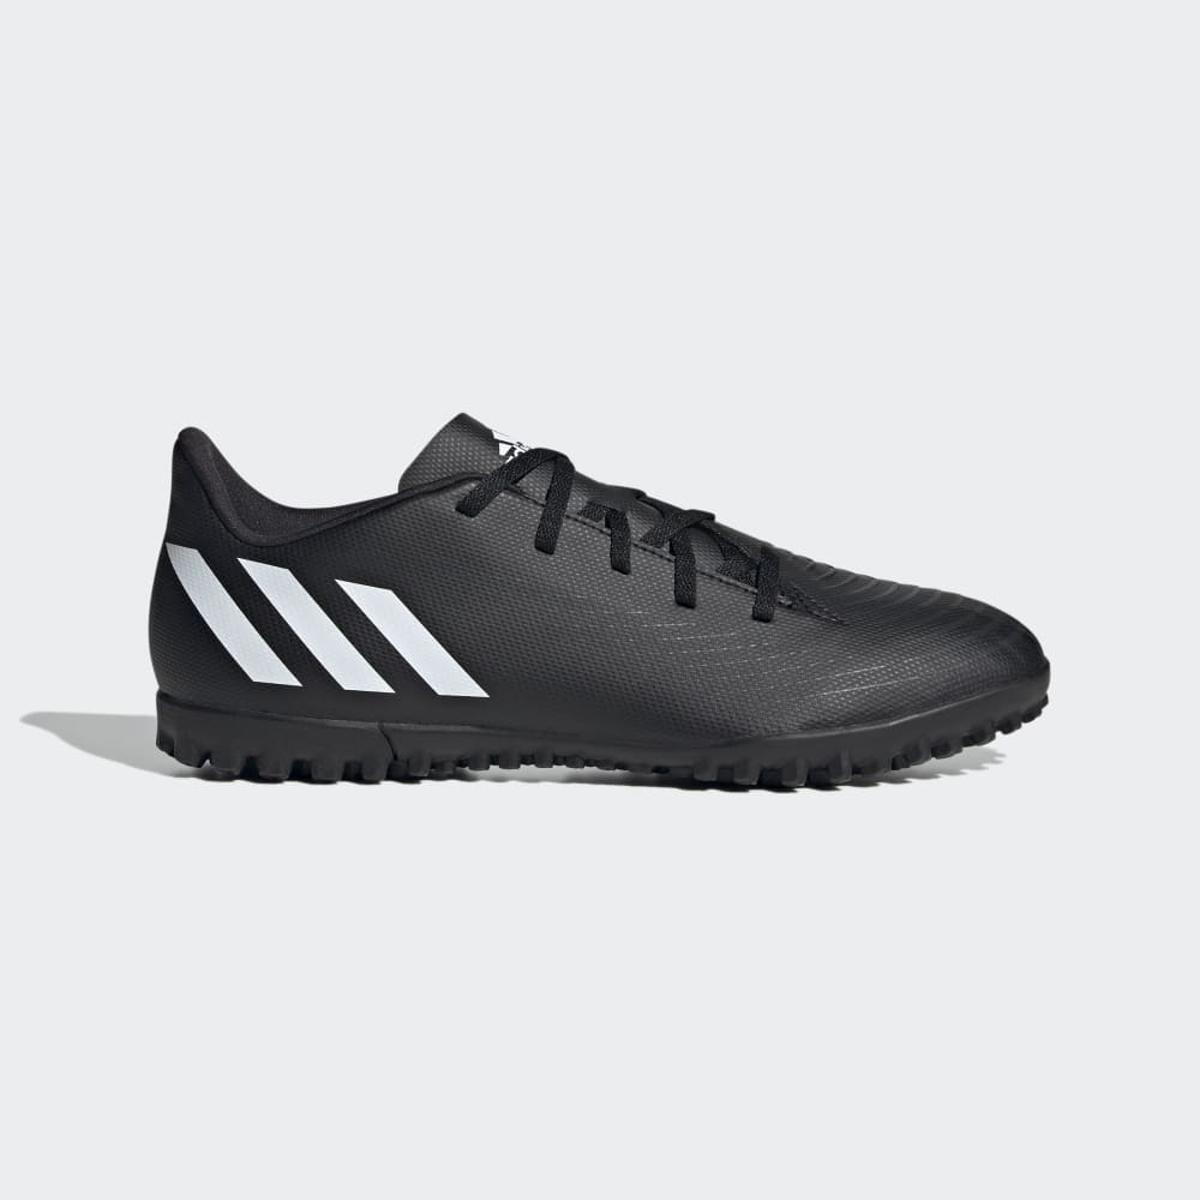 Adidas Football Shoes Best Price in Pakistan 